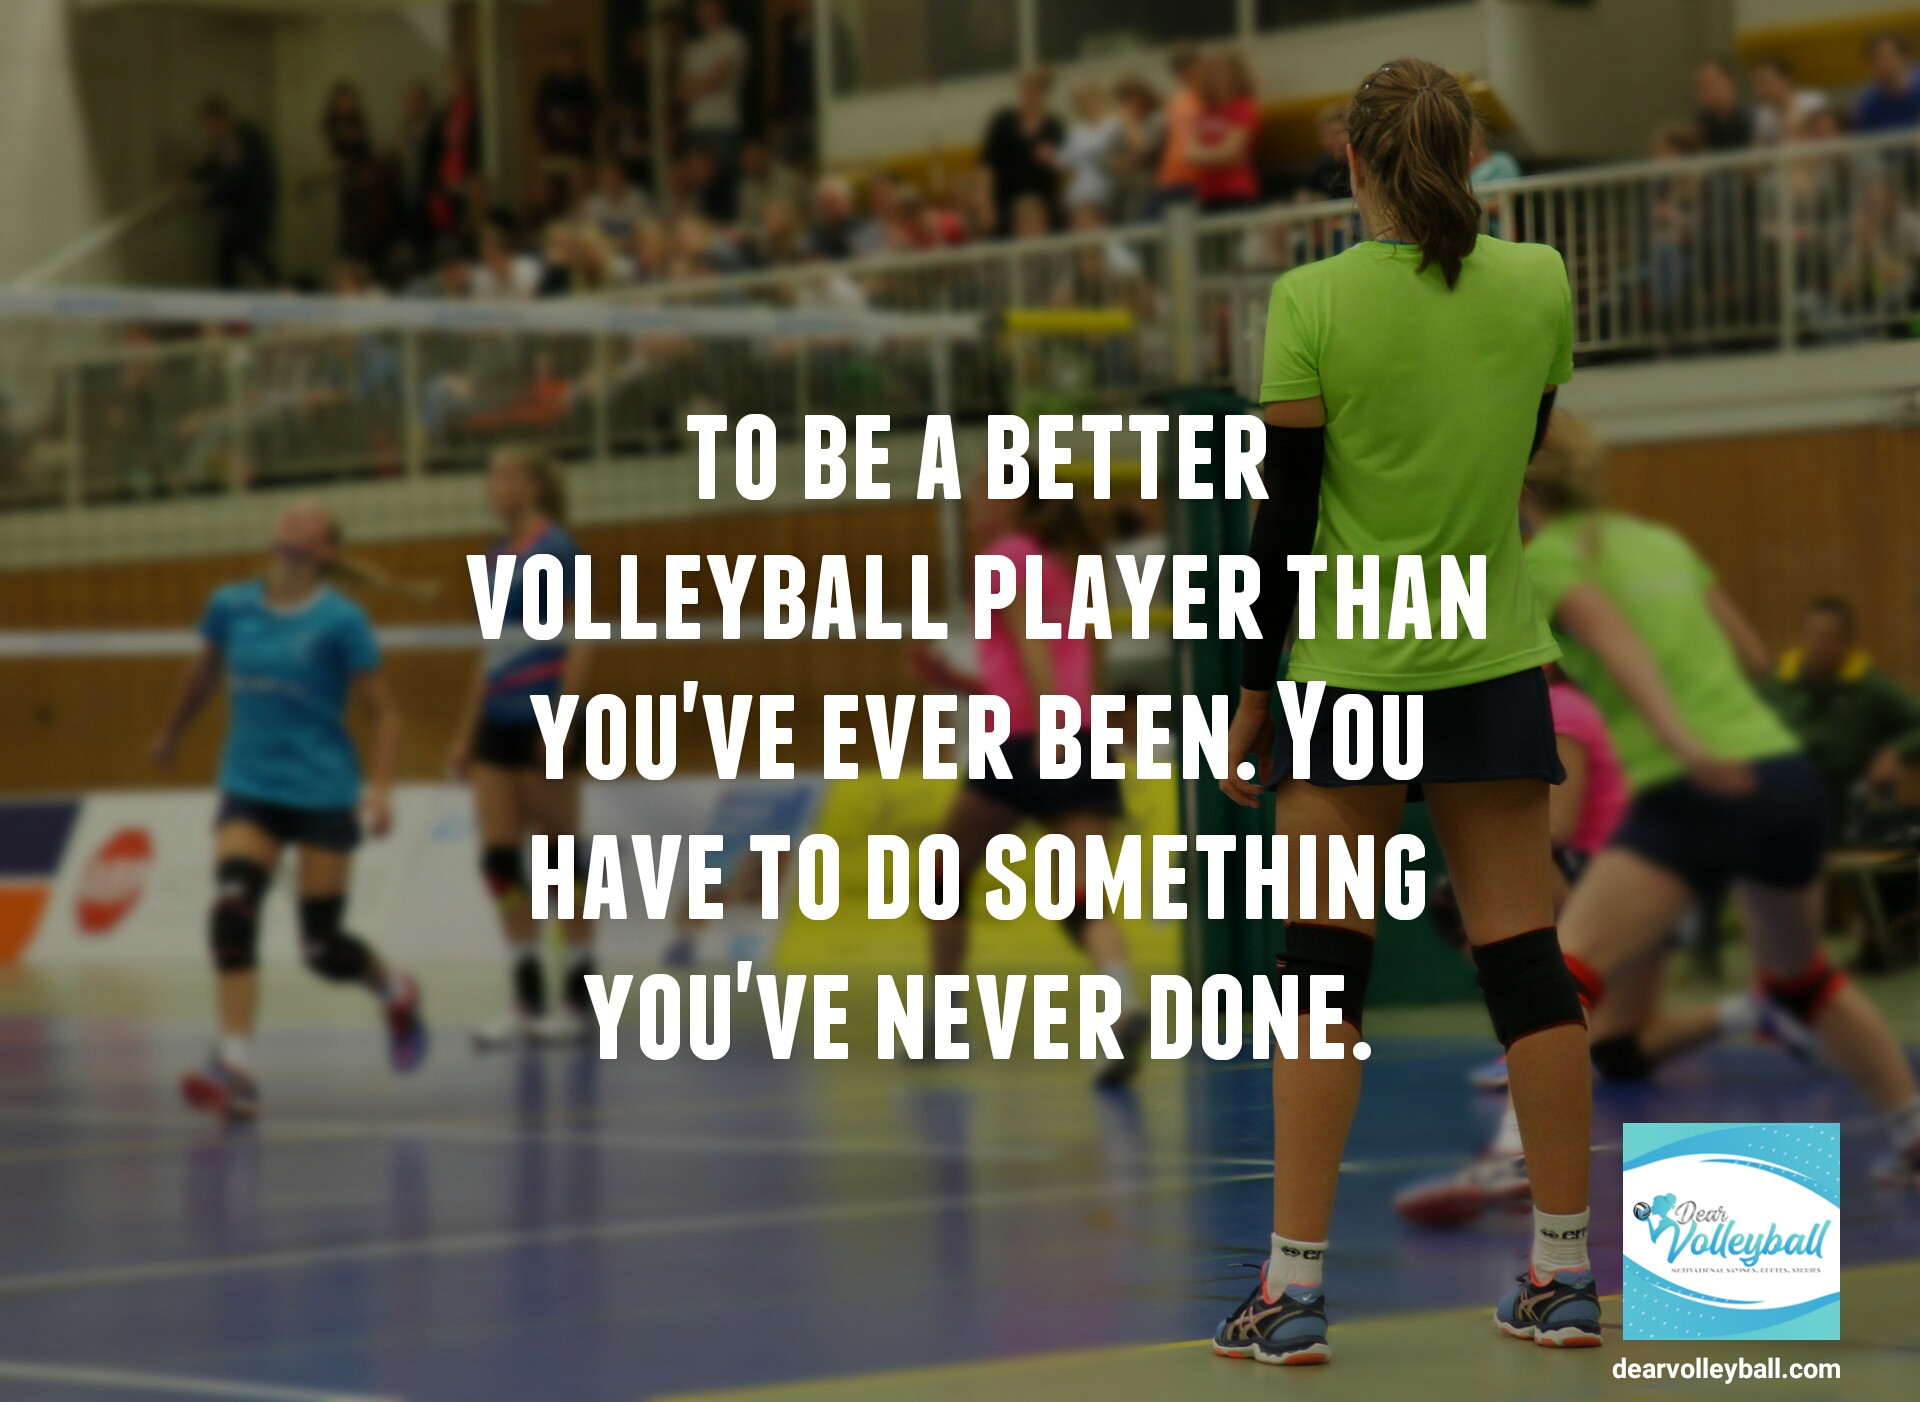 Volleyball Motivational Quotes
 37 Volleyball Motivational Quotes and That Inspire